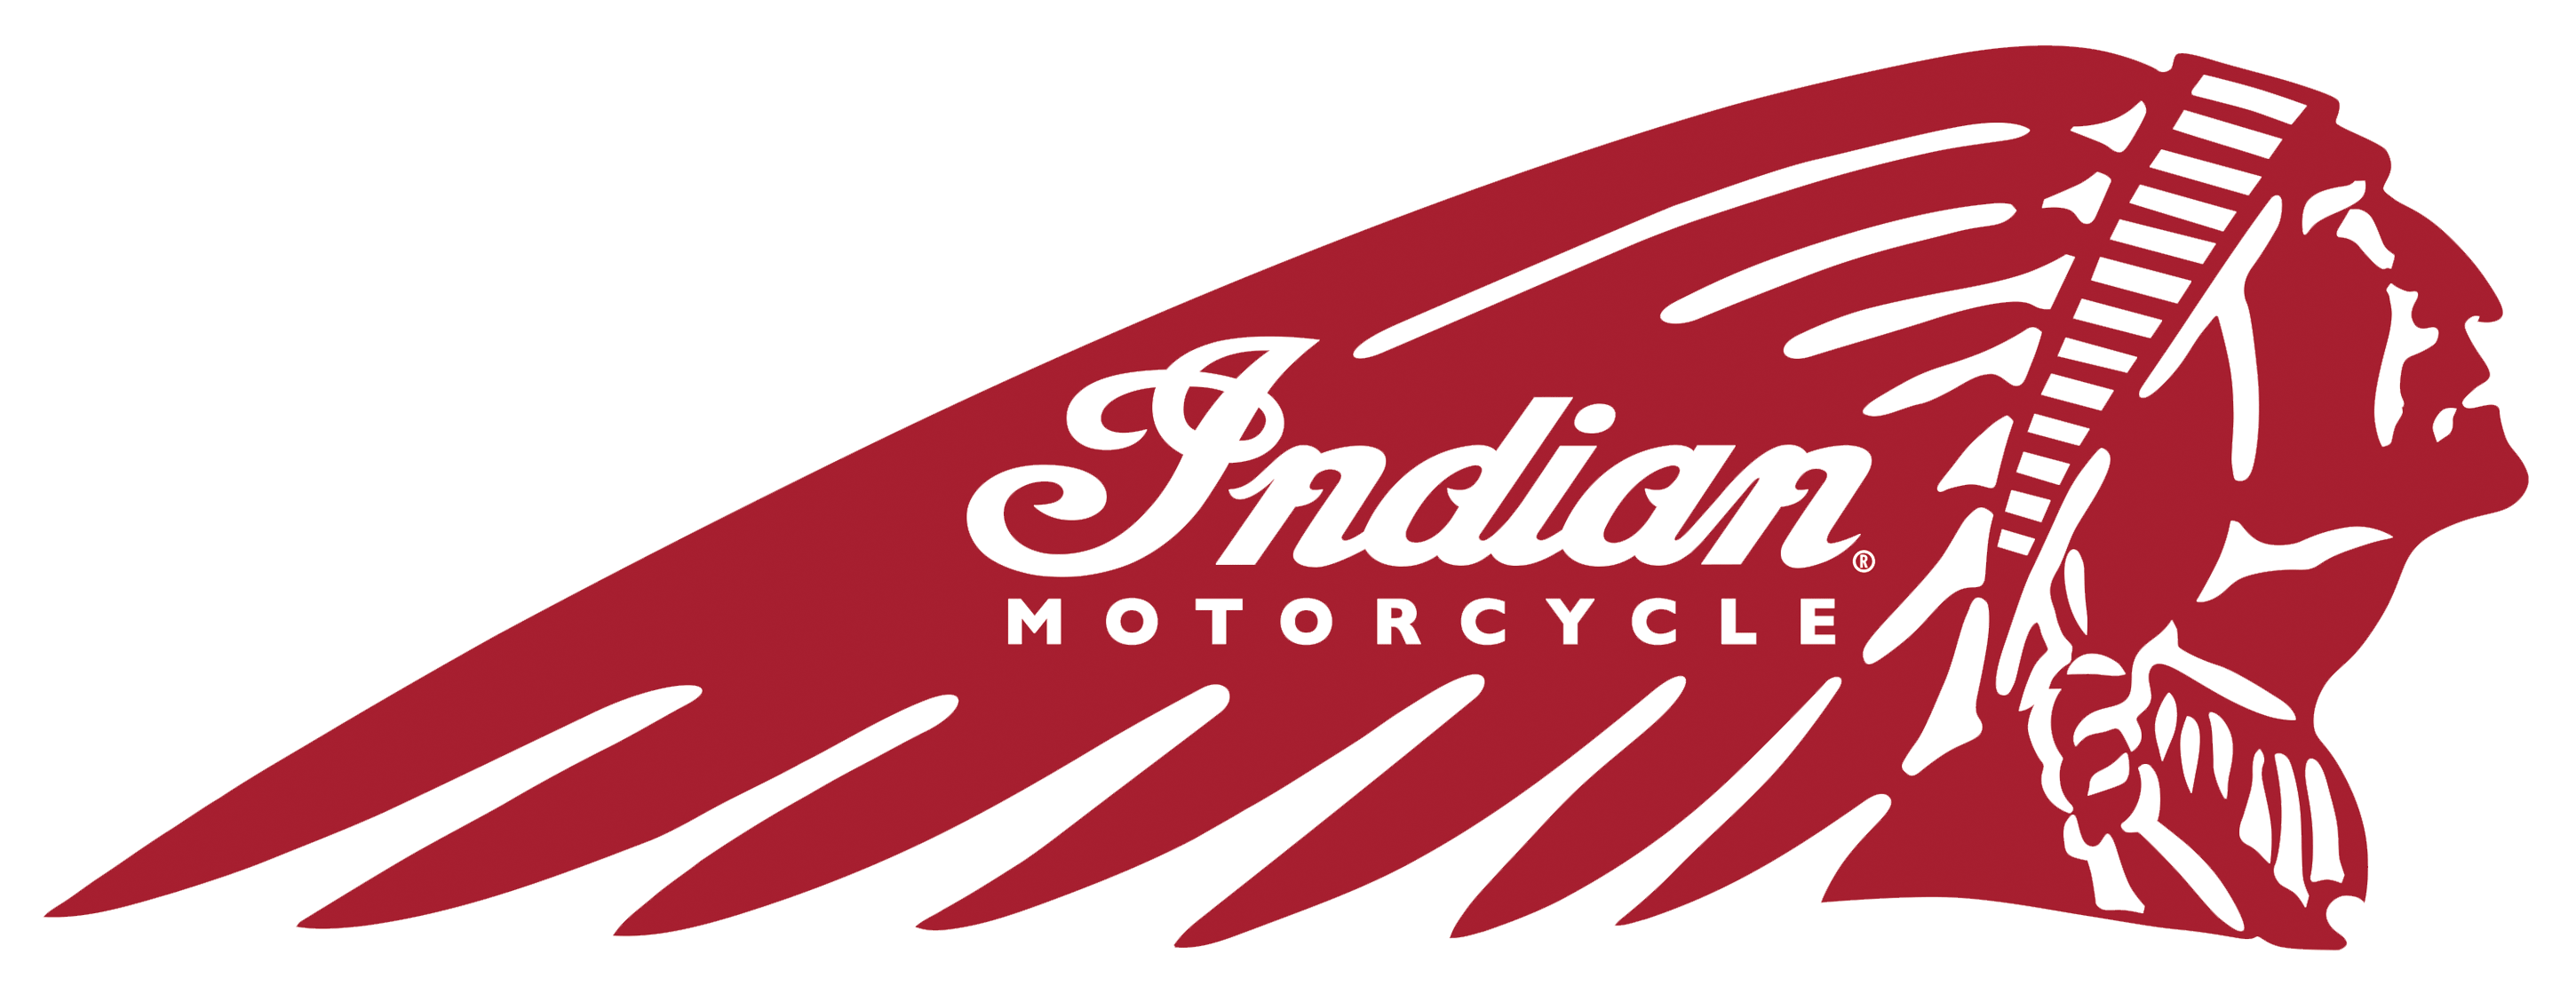 Motorcycle Company Logo - Indian logo | Motorcycle Brands